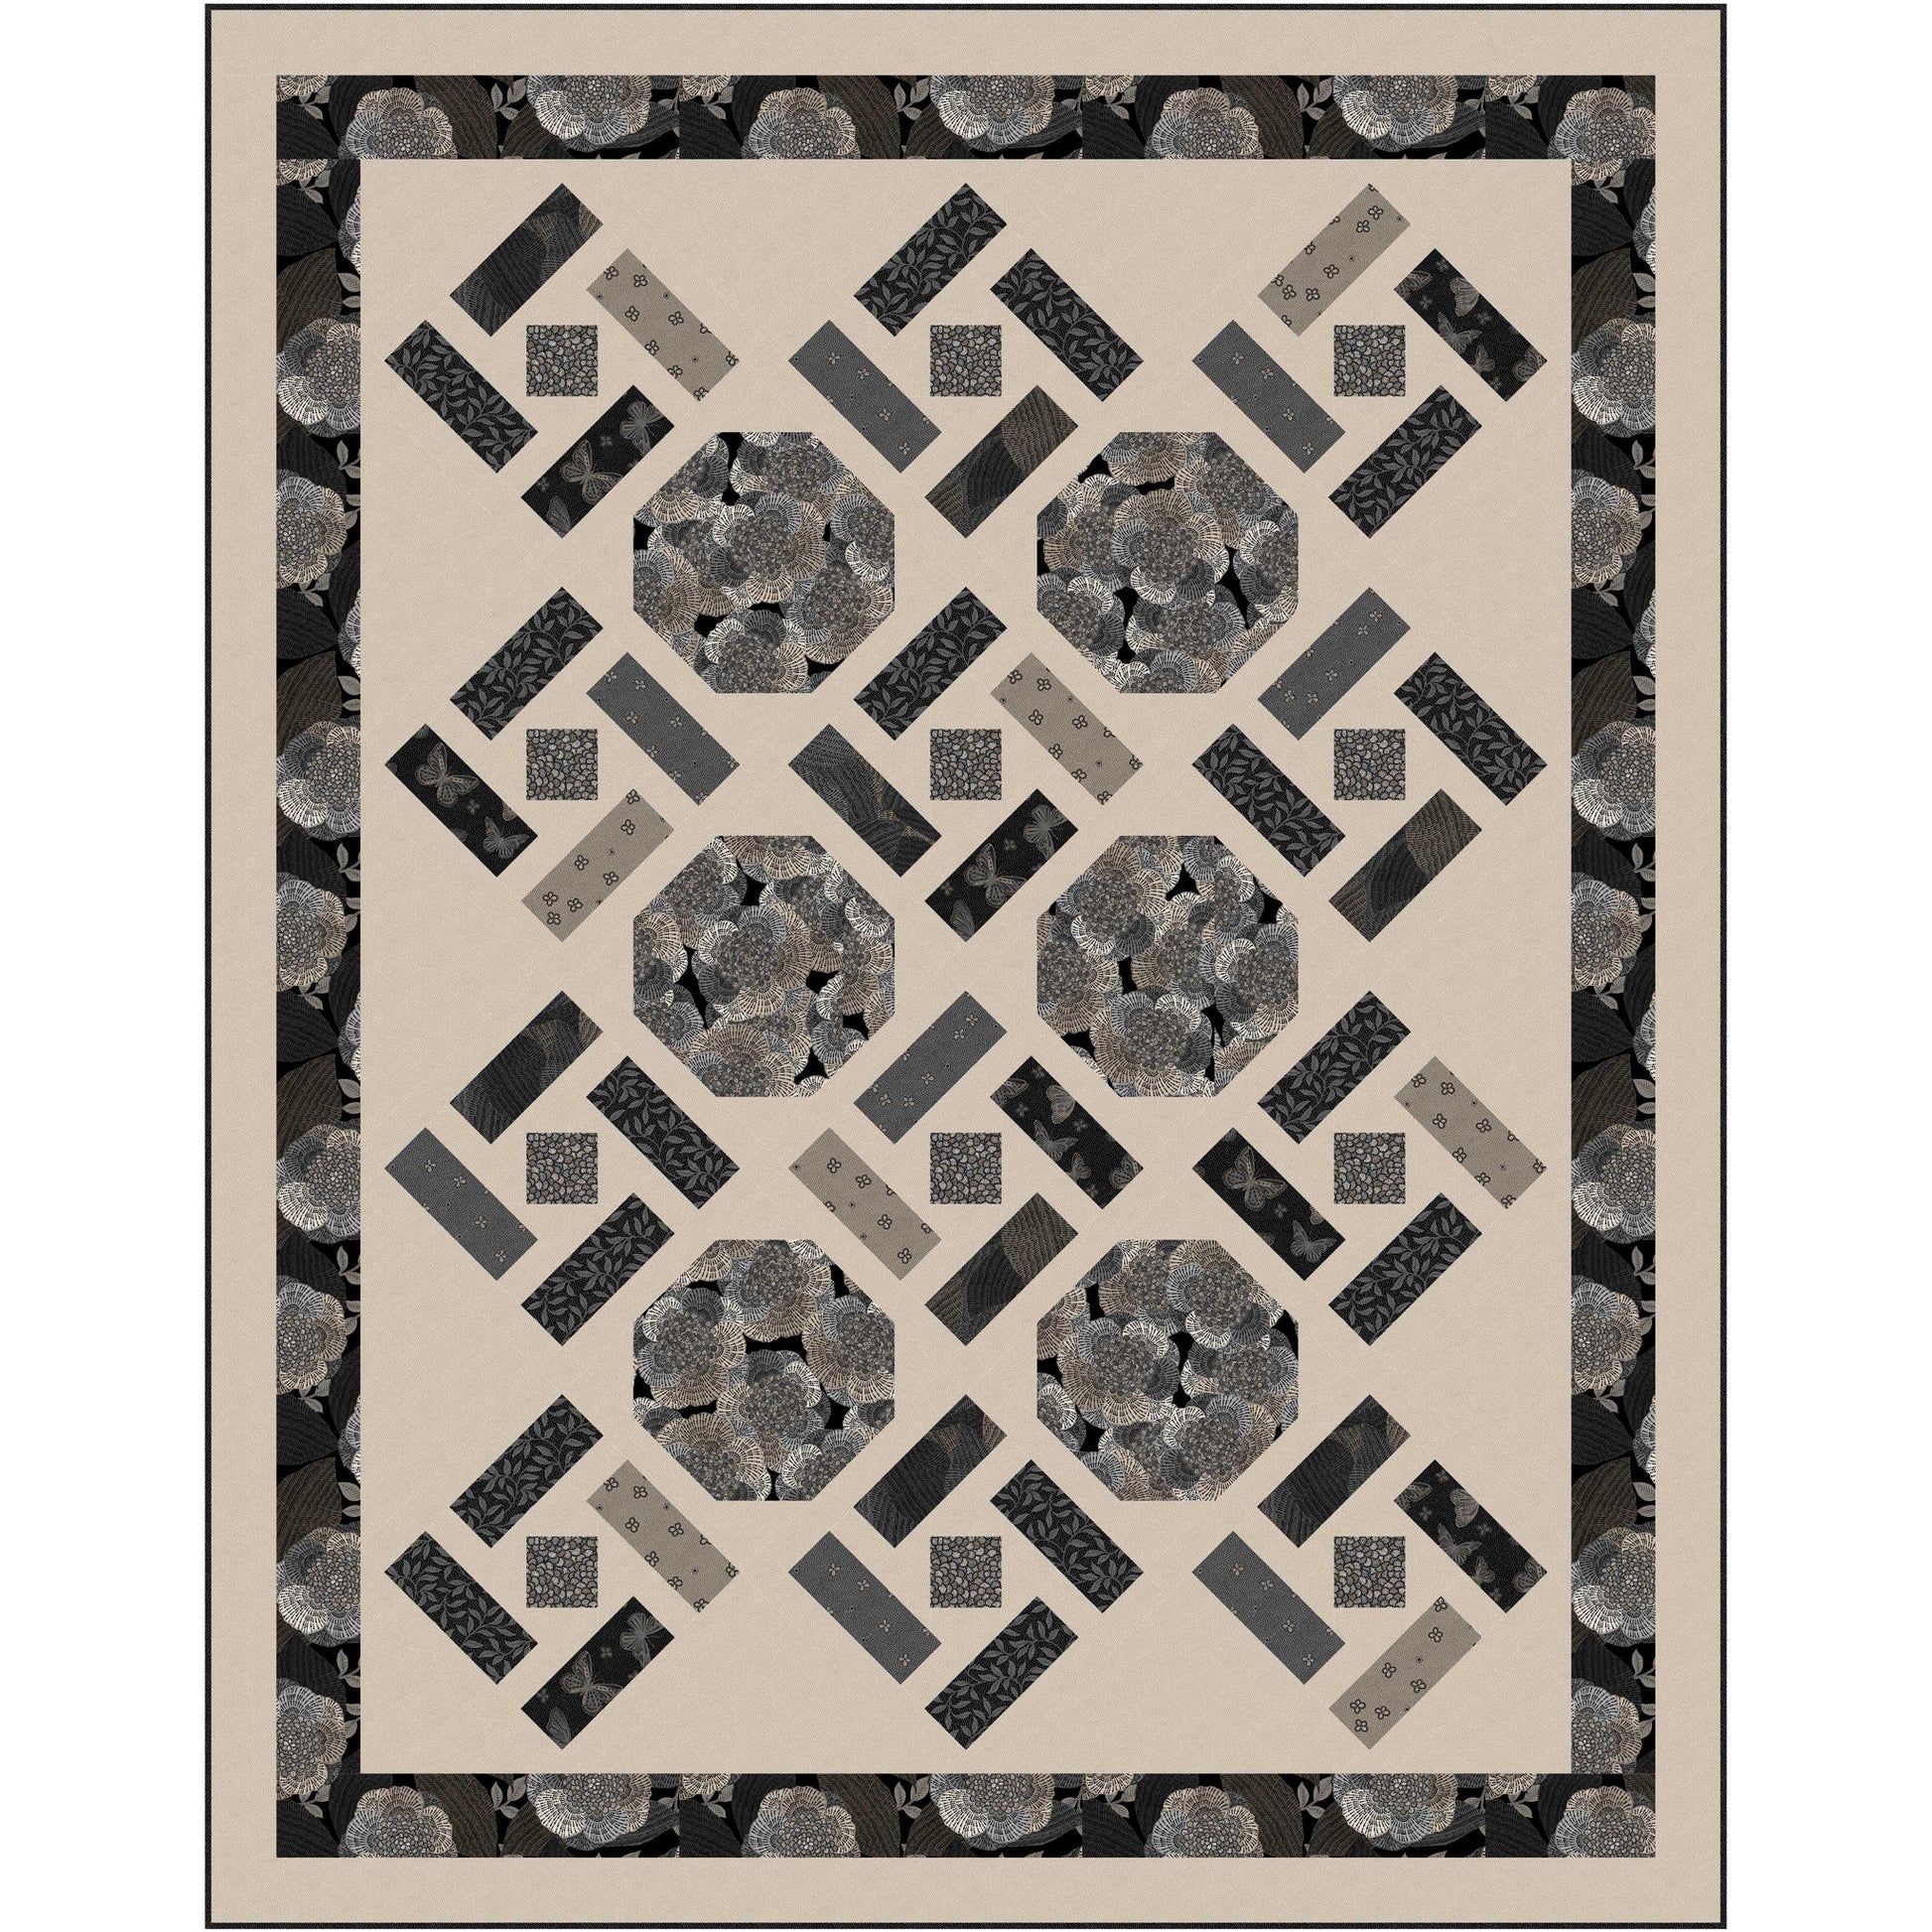 A quilt showcasing a pattern of black and gray hexagons and blocks created by strips of color and a diamond in the middle, adding depth and sophistication to the overall design. Background color is tan.